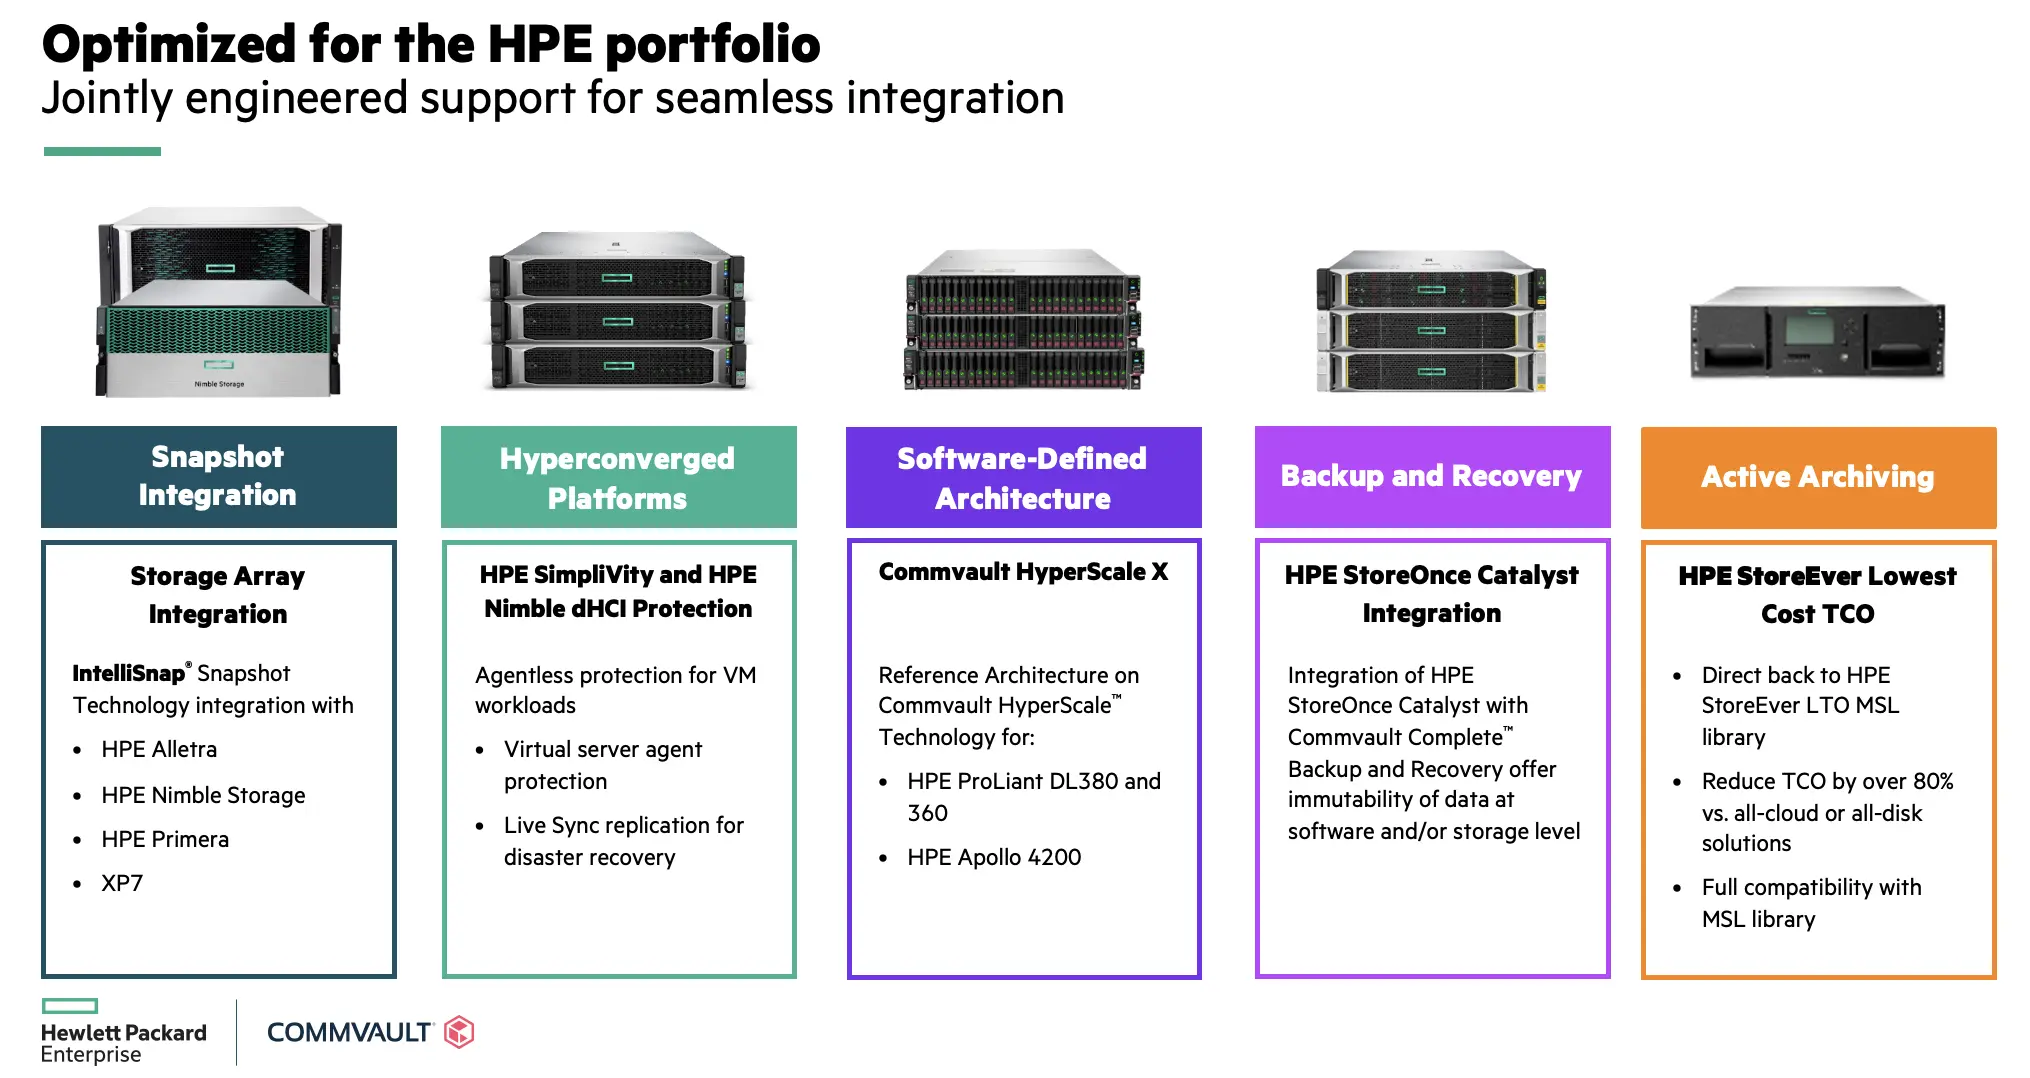 hewlett packard enterprise information library storage - What is the full form of HPE storage